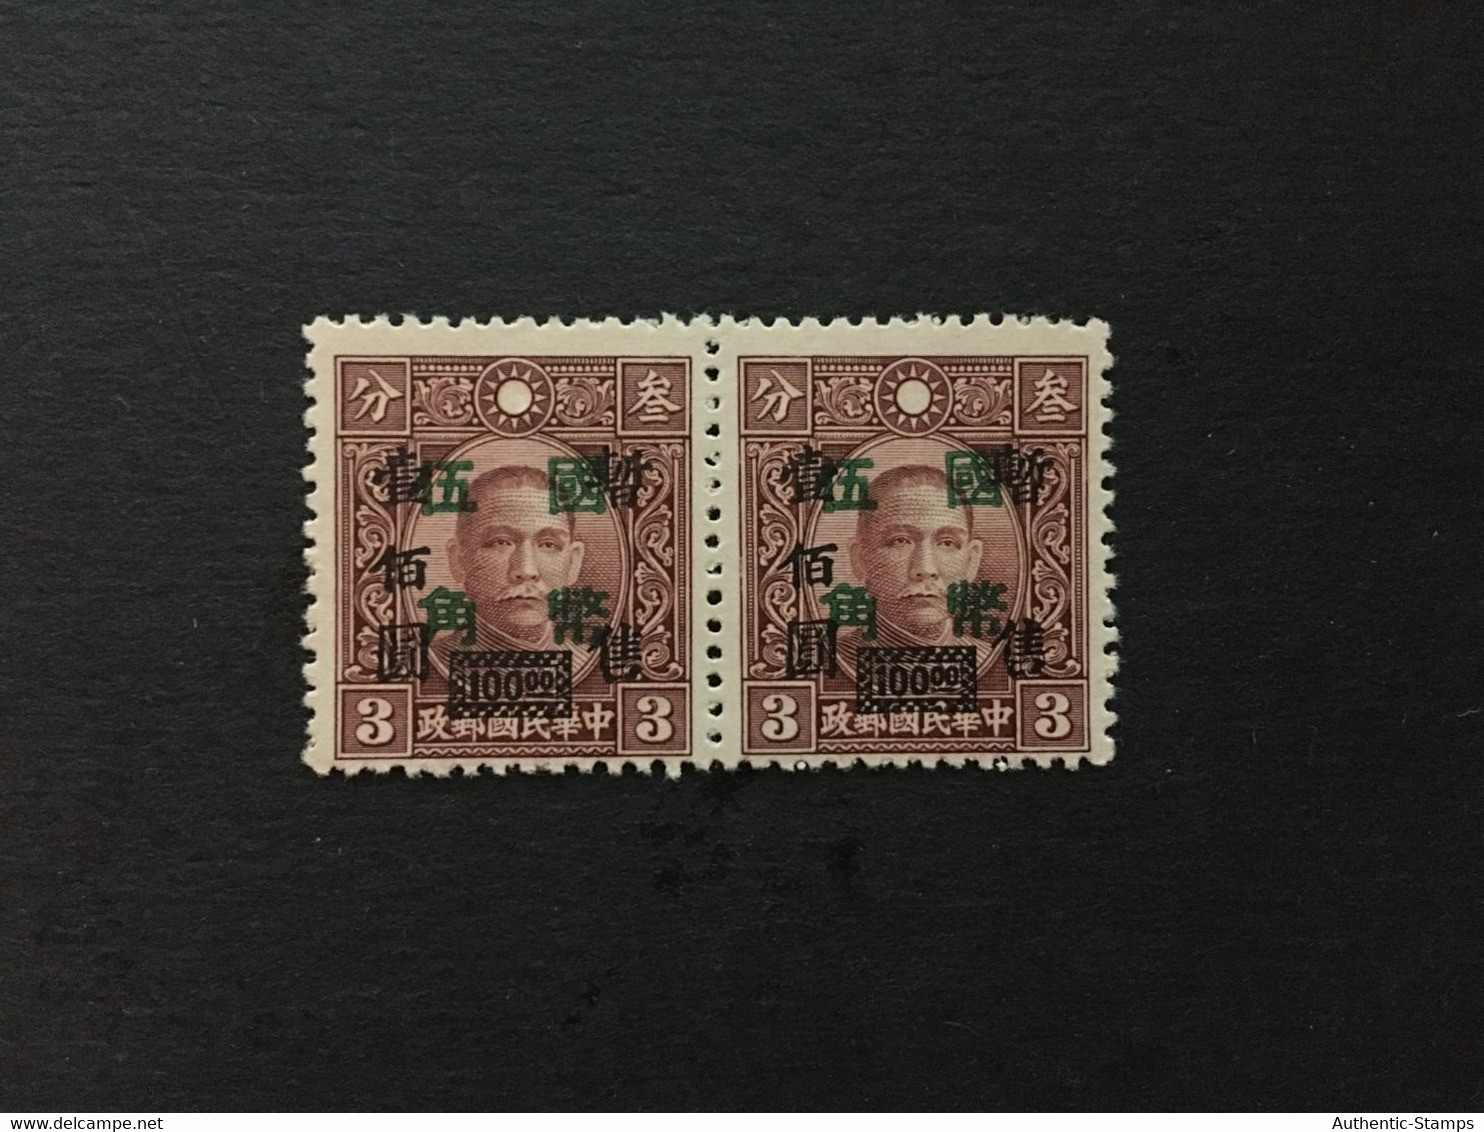 CHINA  STAMP BLOCK, MNH, JAPANESE OCCUPATION,Overprinted With “Temporarity Sold For”and Surcharged，CINA,CHINE,LIST 302 - 1943-45 Shanghai & Nankin